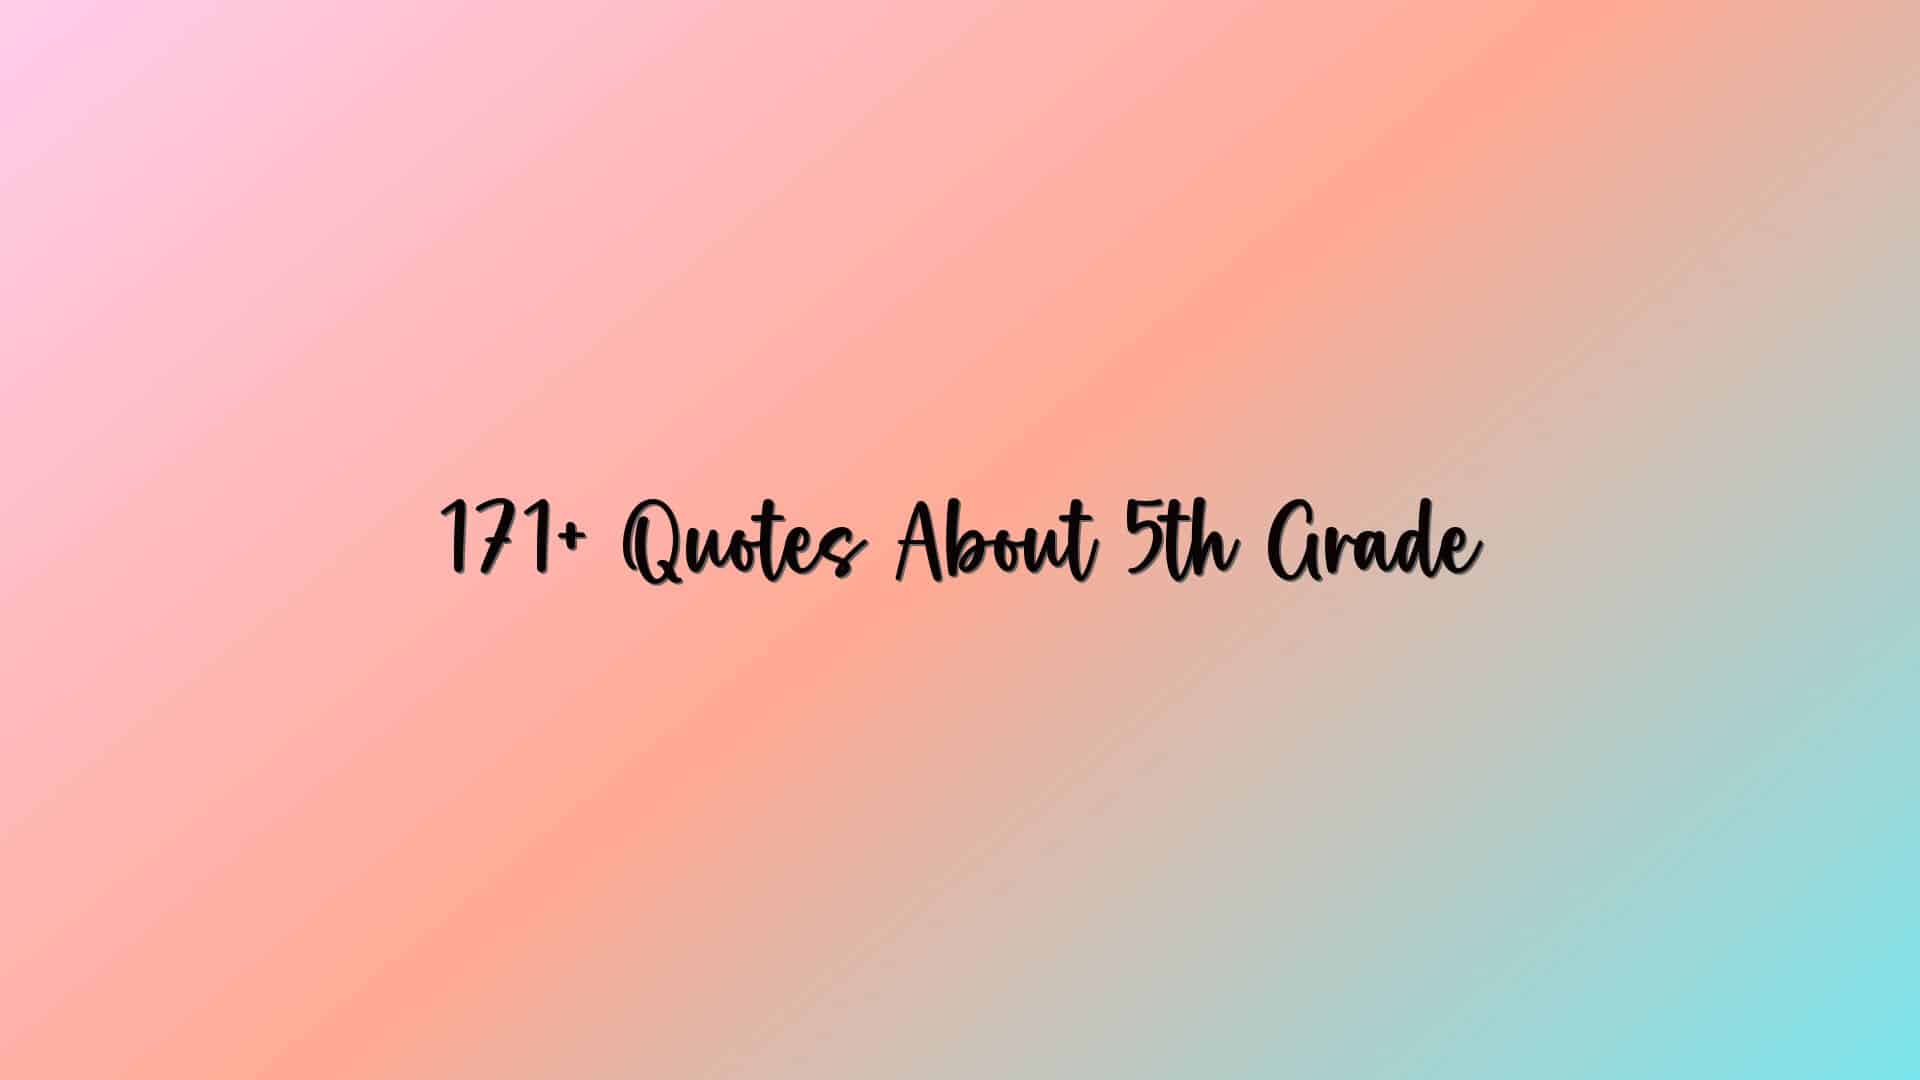 171+ Quotes About 5th Grade